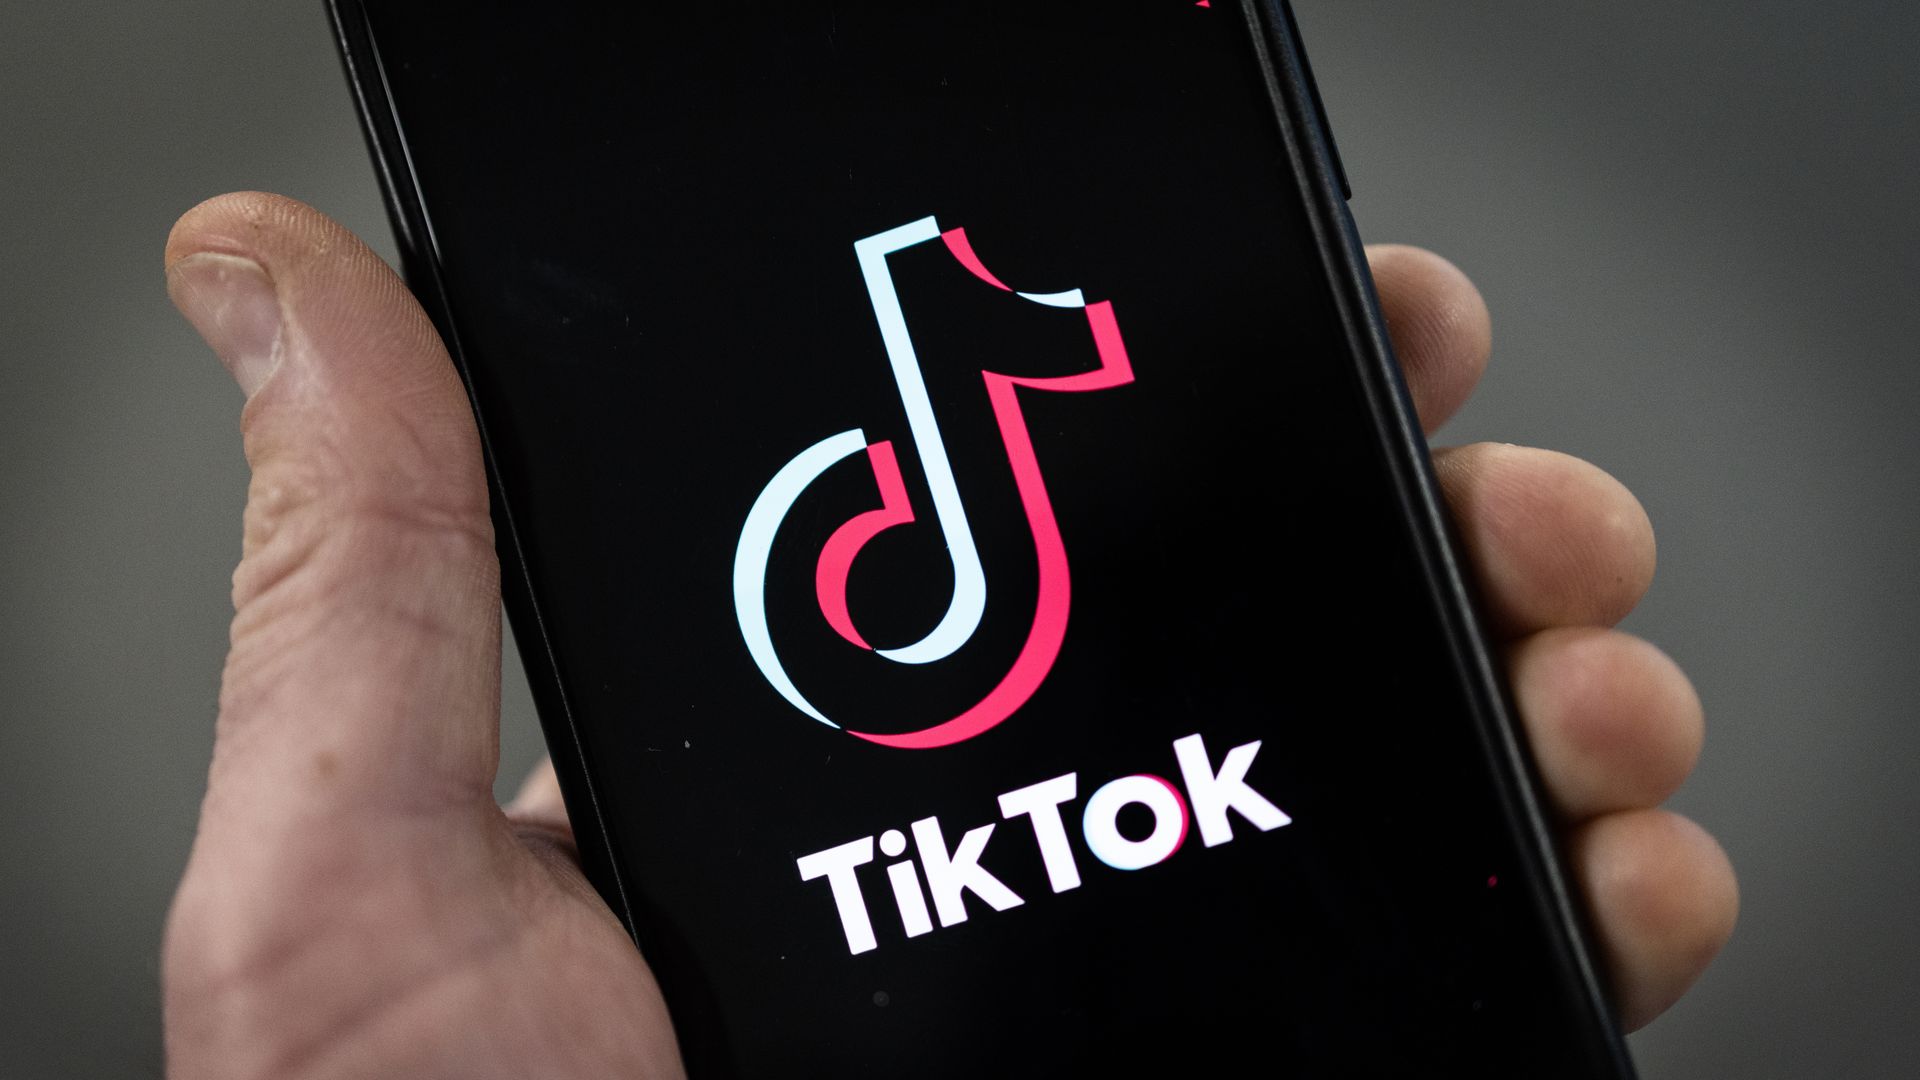 a TikTok logo is displayed on an iPhone